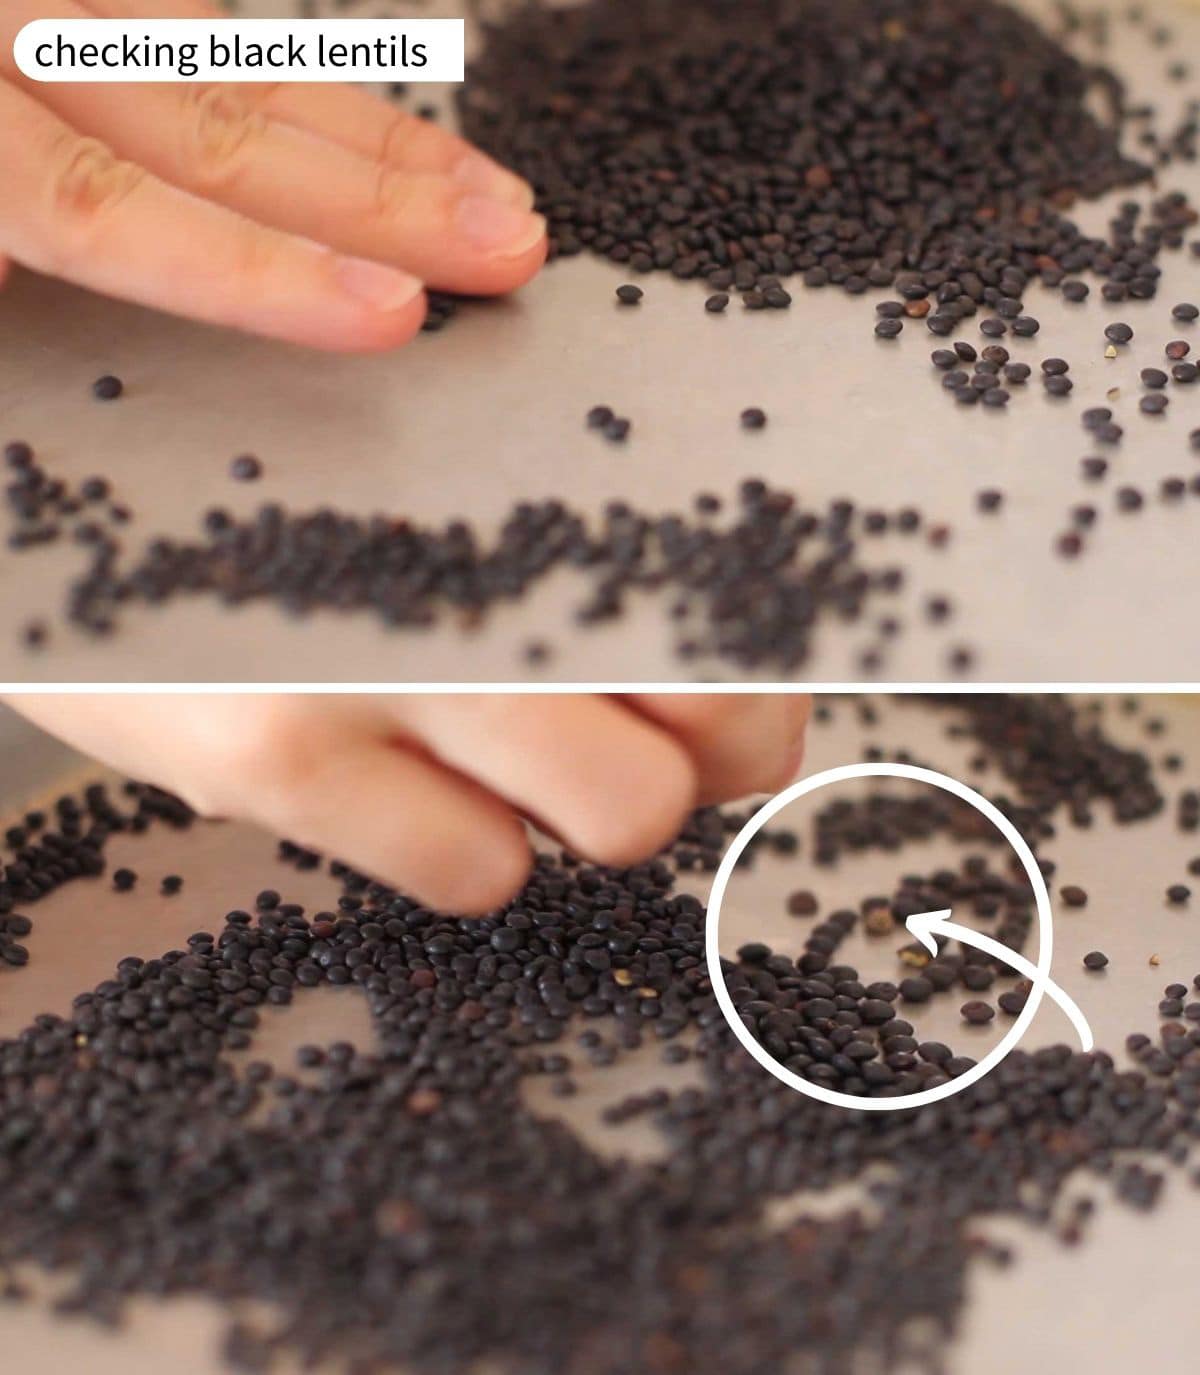 Two close-up photos of a hand sorting through black lentils on a sheet tray with a circle around a small pebble and an arrow pointing it out.